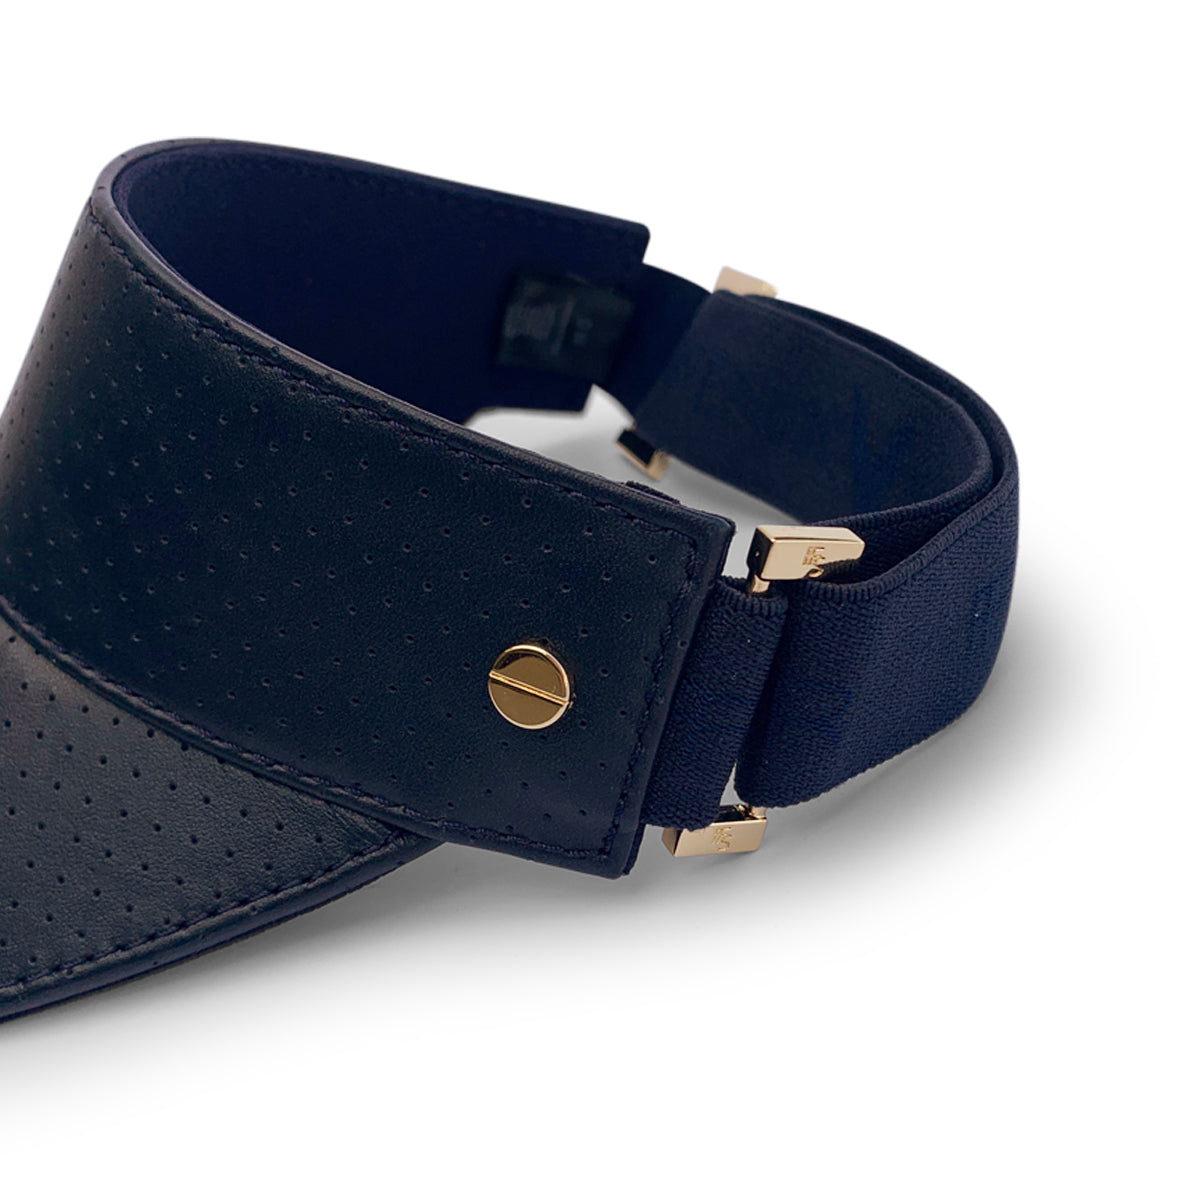 The Visor - Navy Leather & Gold